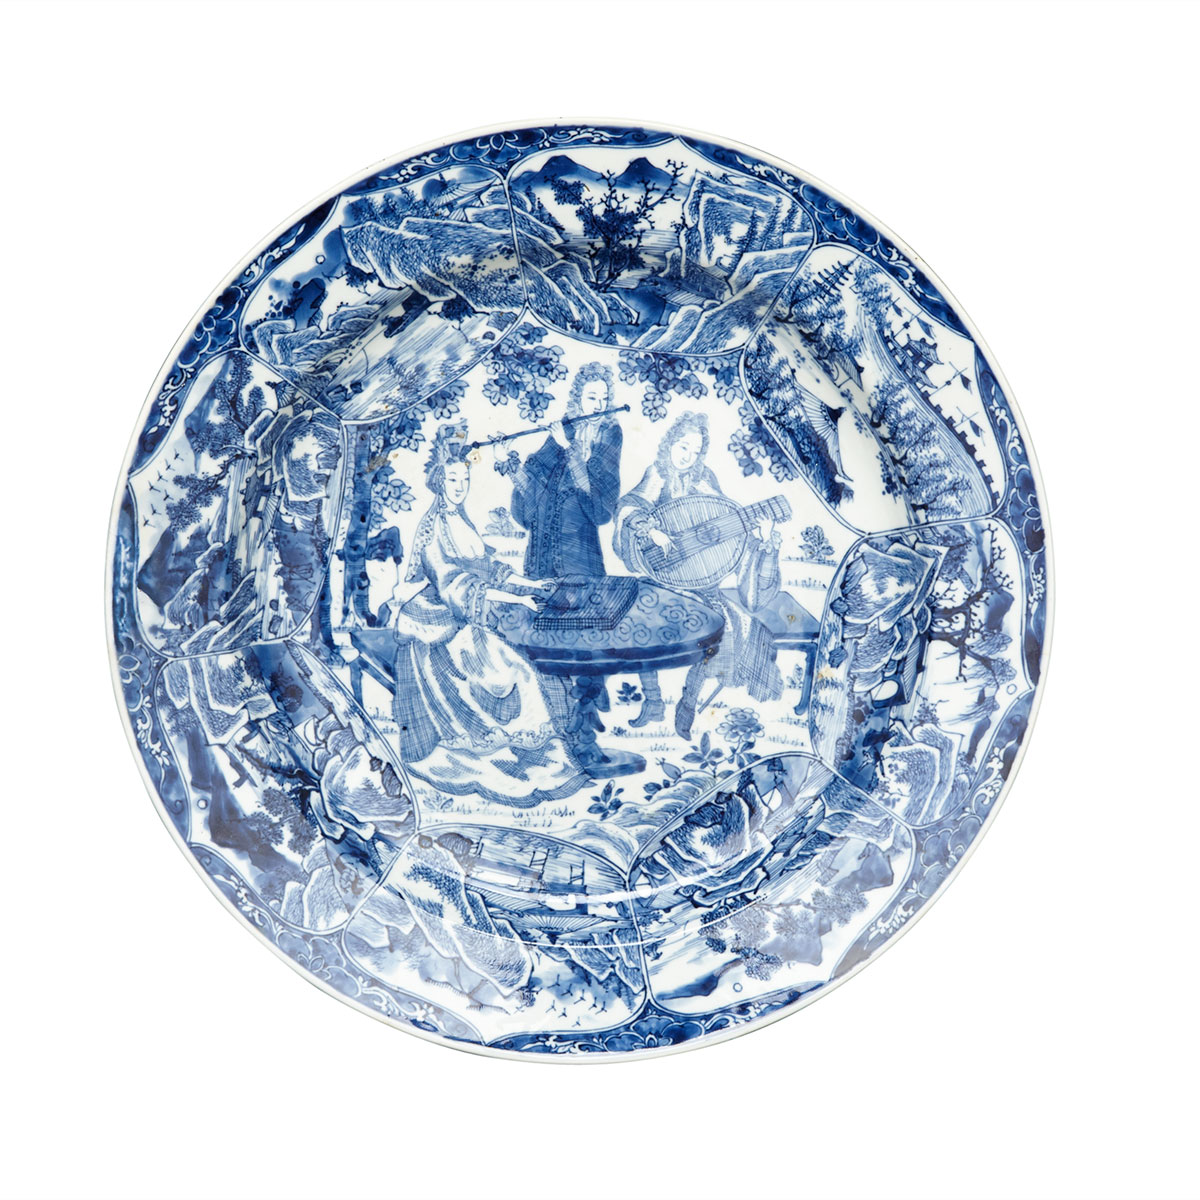 Rare and Large Export Blue and White ‘Three Musicians’ Plate, Kangxi Period, circa 1683-1700